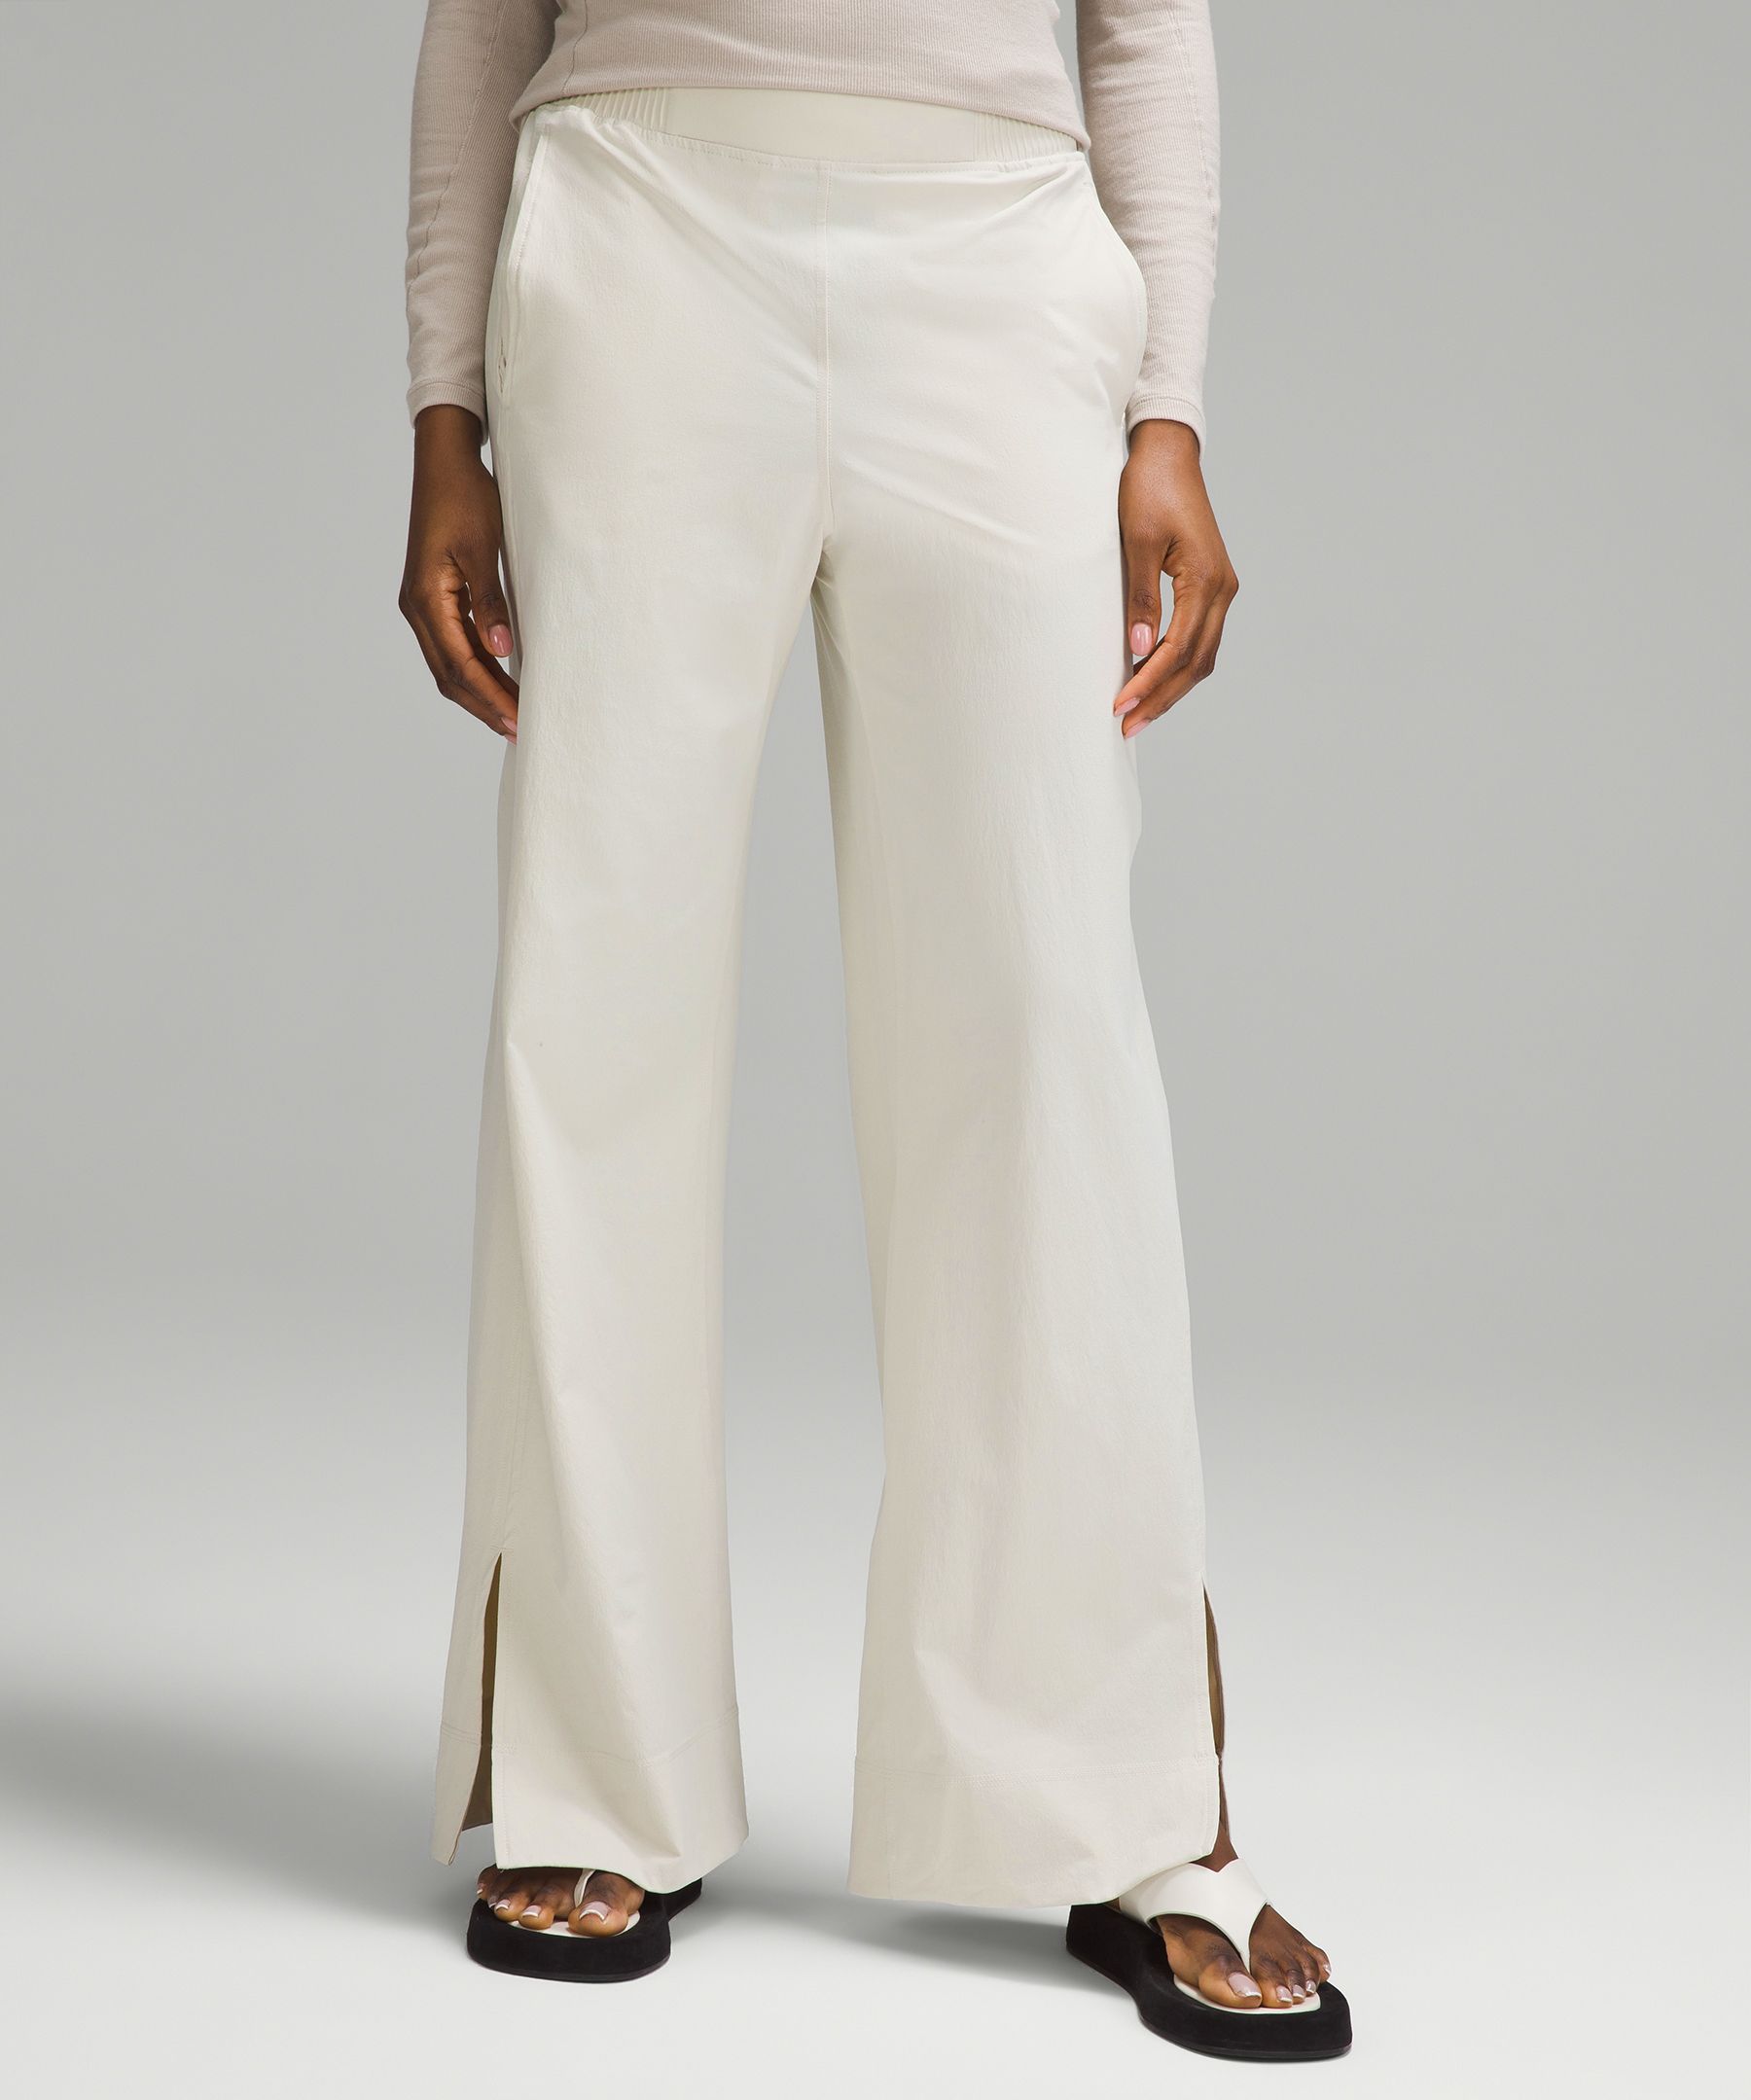 White Woven High Waisted Flare Pants